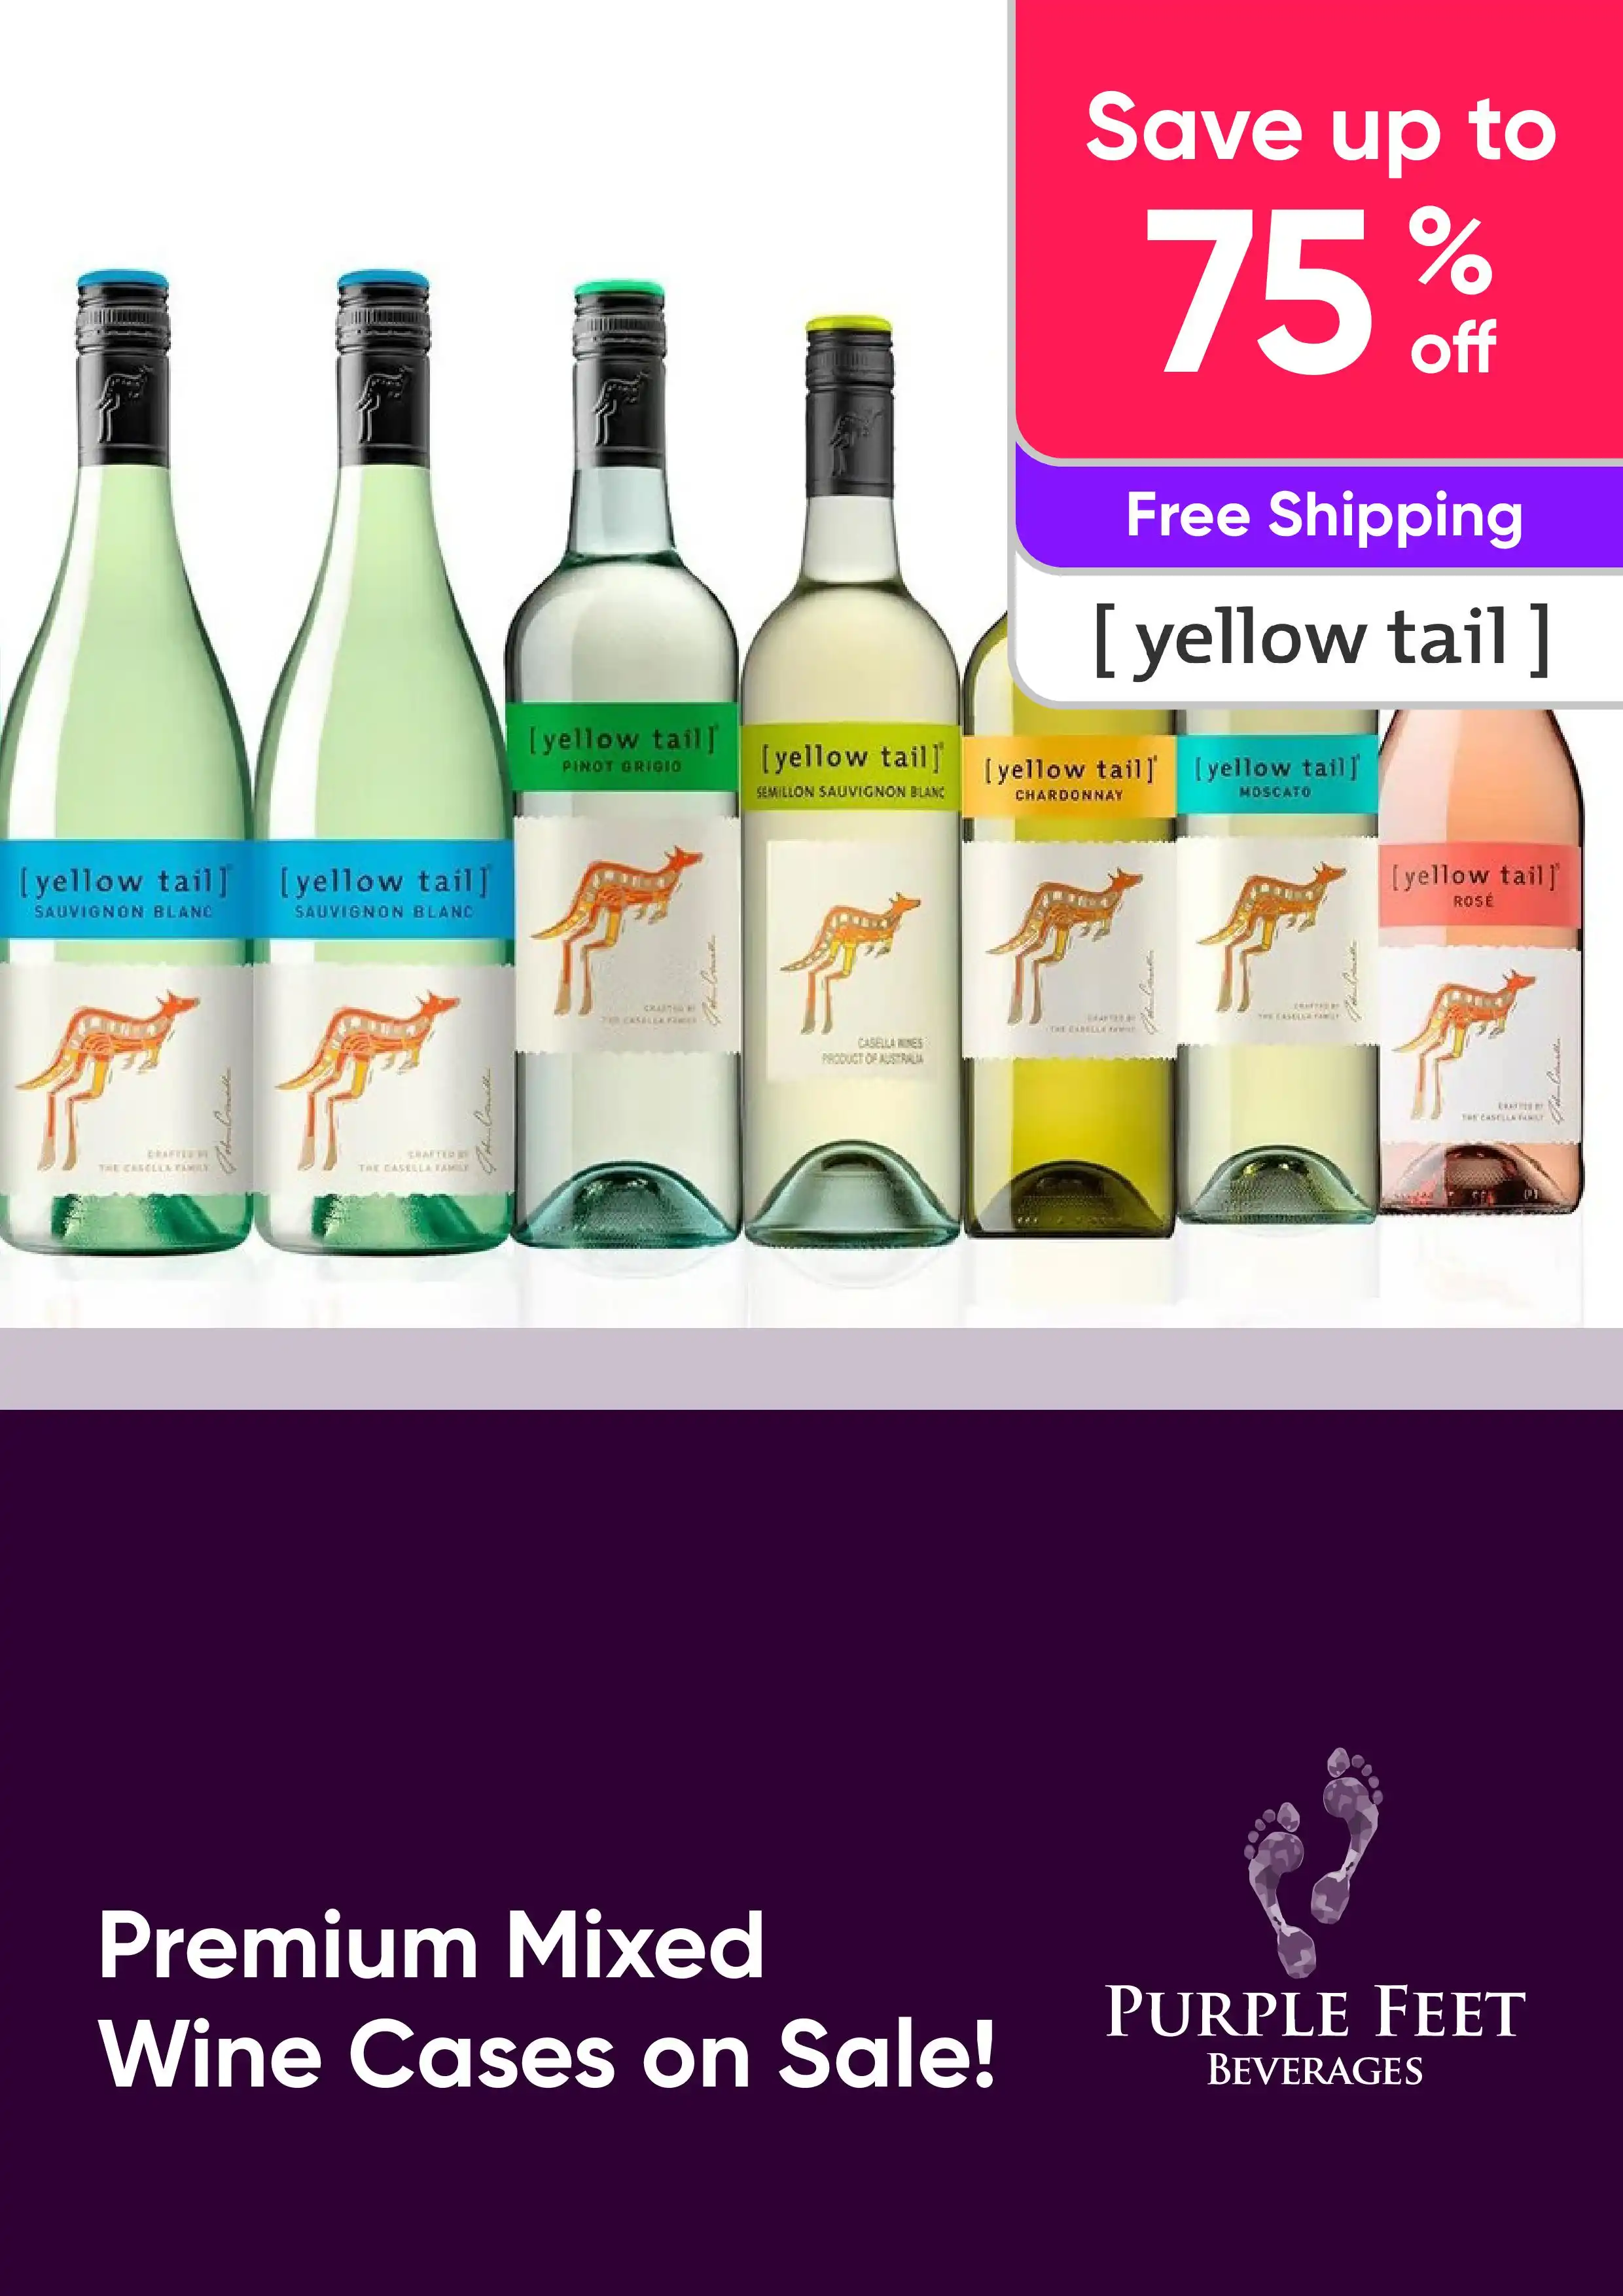 Premium Mixed Wine Cases on Sale! - Yellow Tail - Save up to 75%